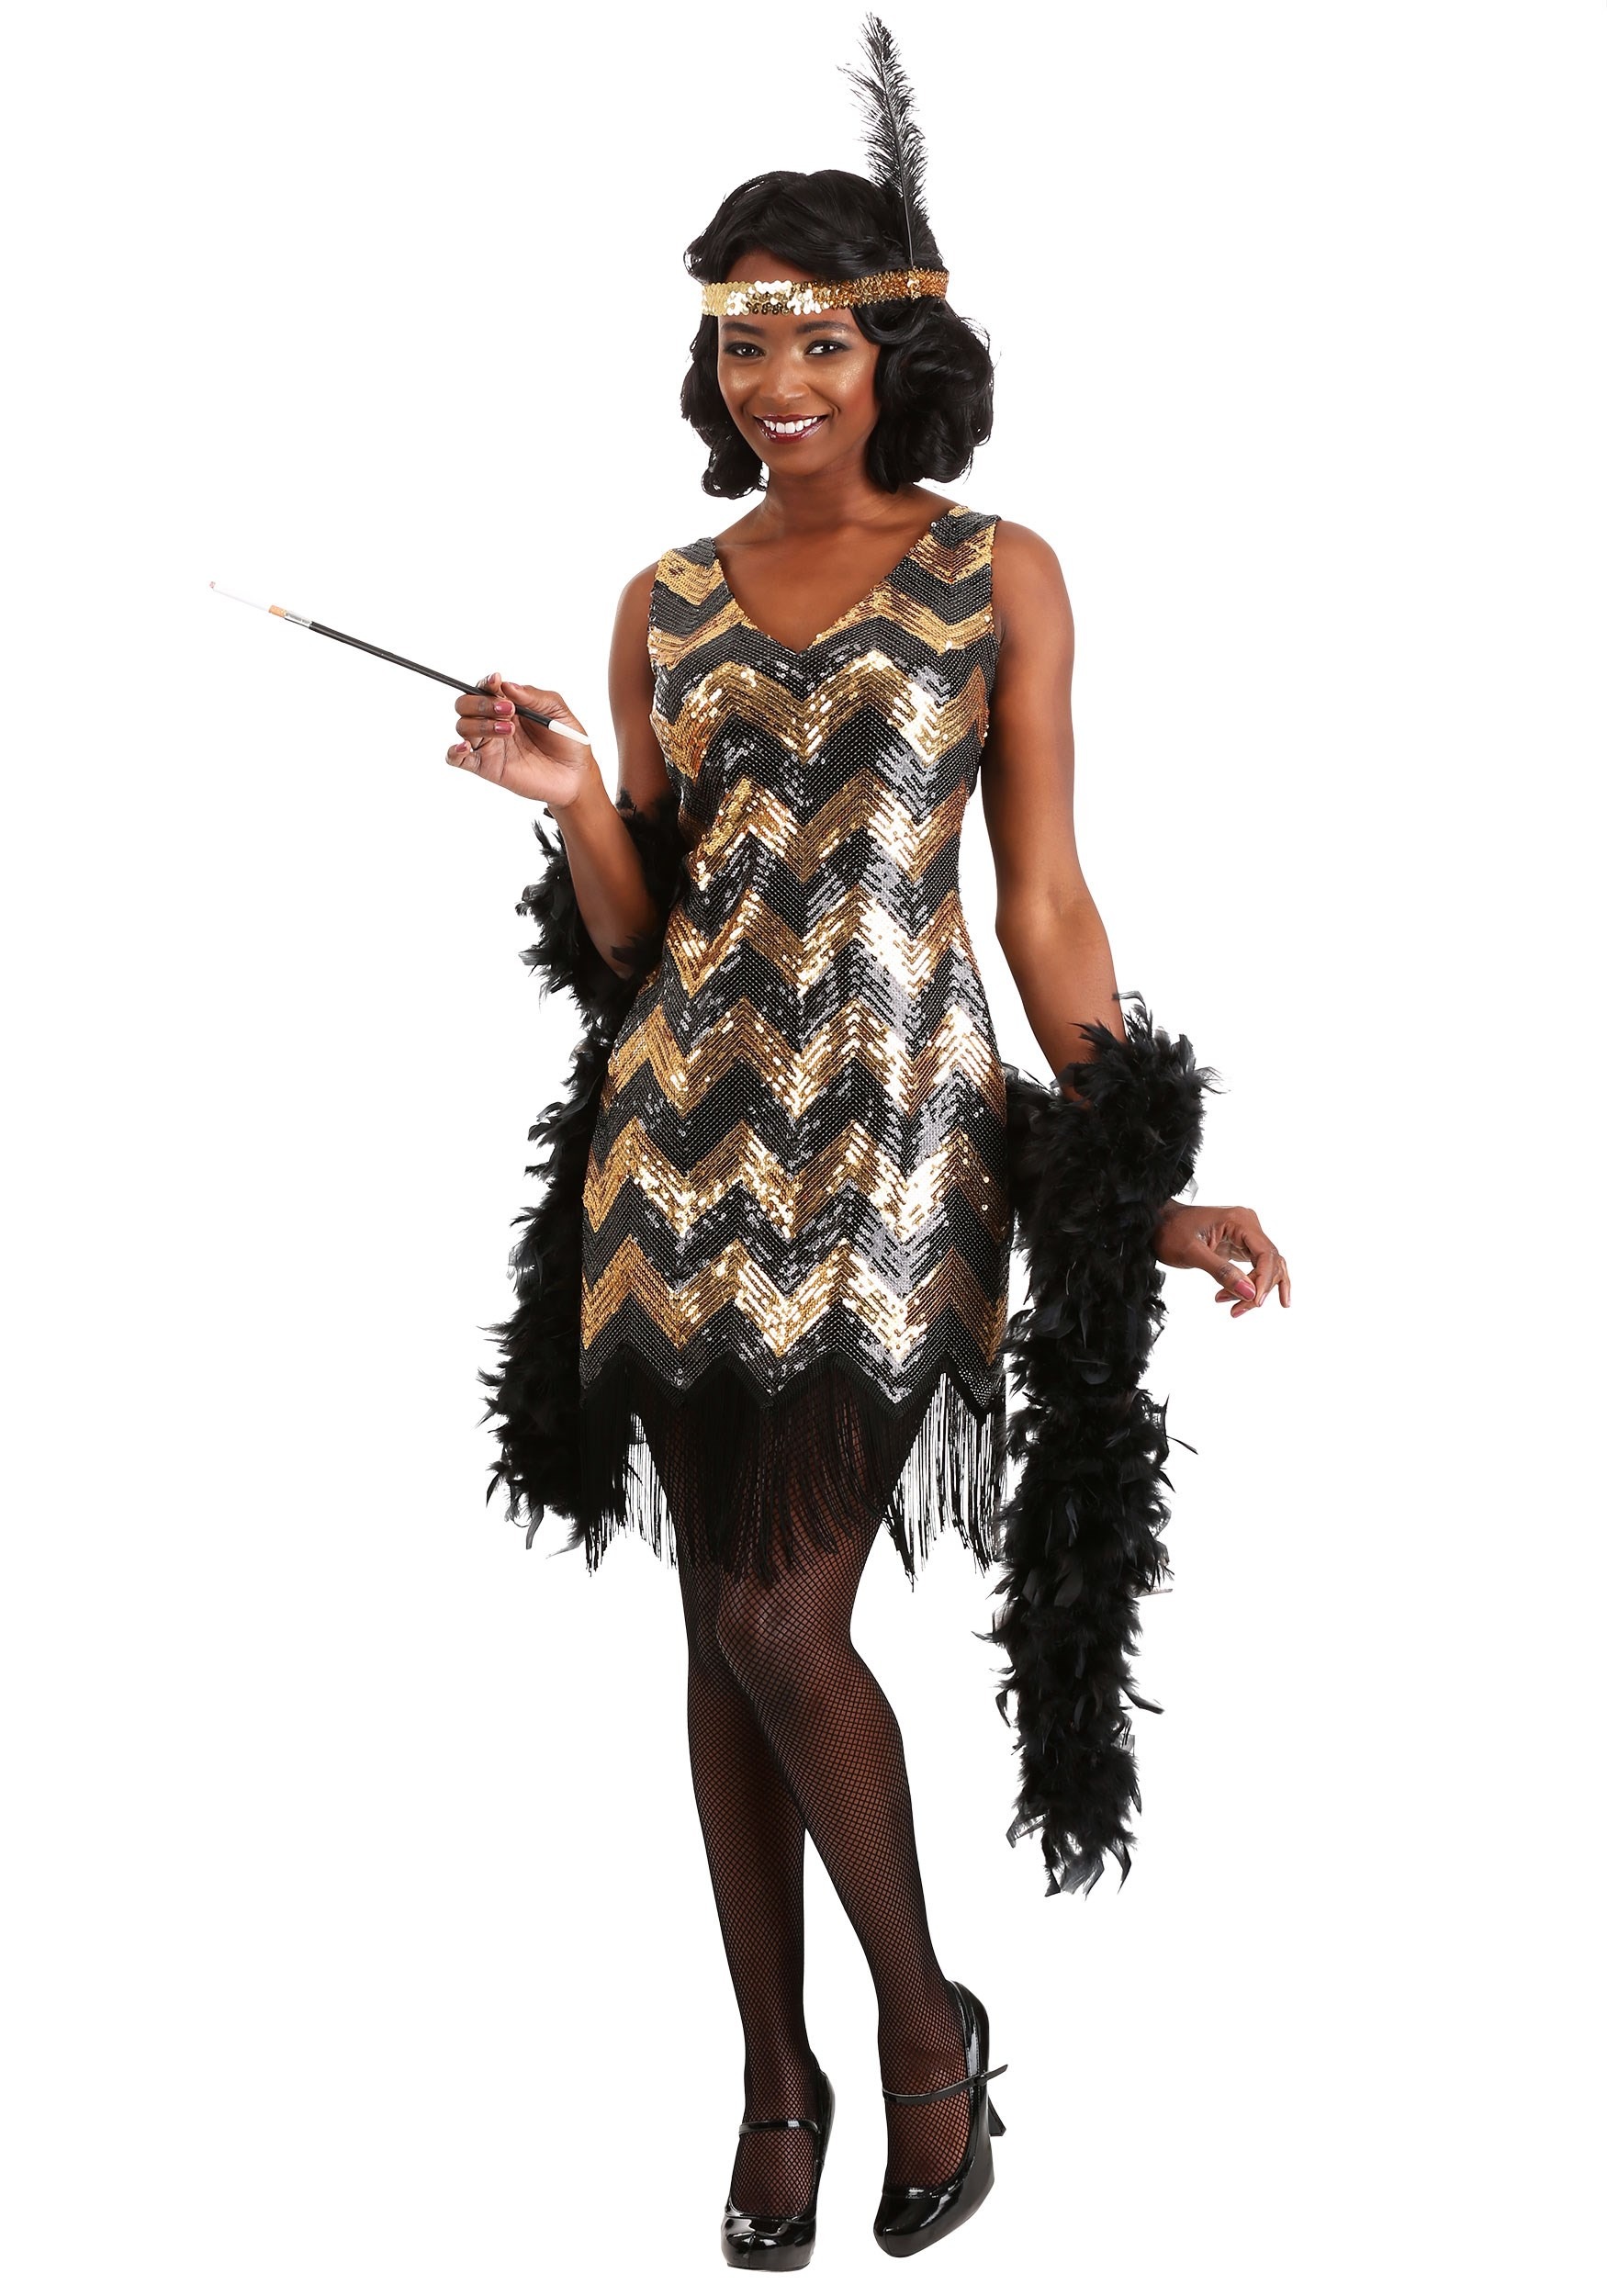 https://images.halloweencostumes.ca/products/46103/1-1/womens-dolled-up-flapper-costume.jpg